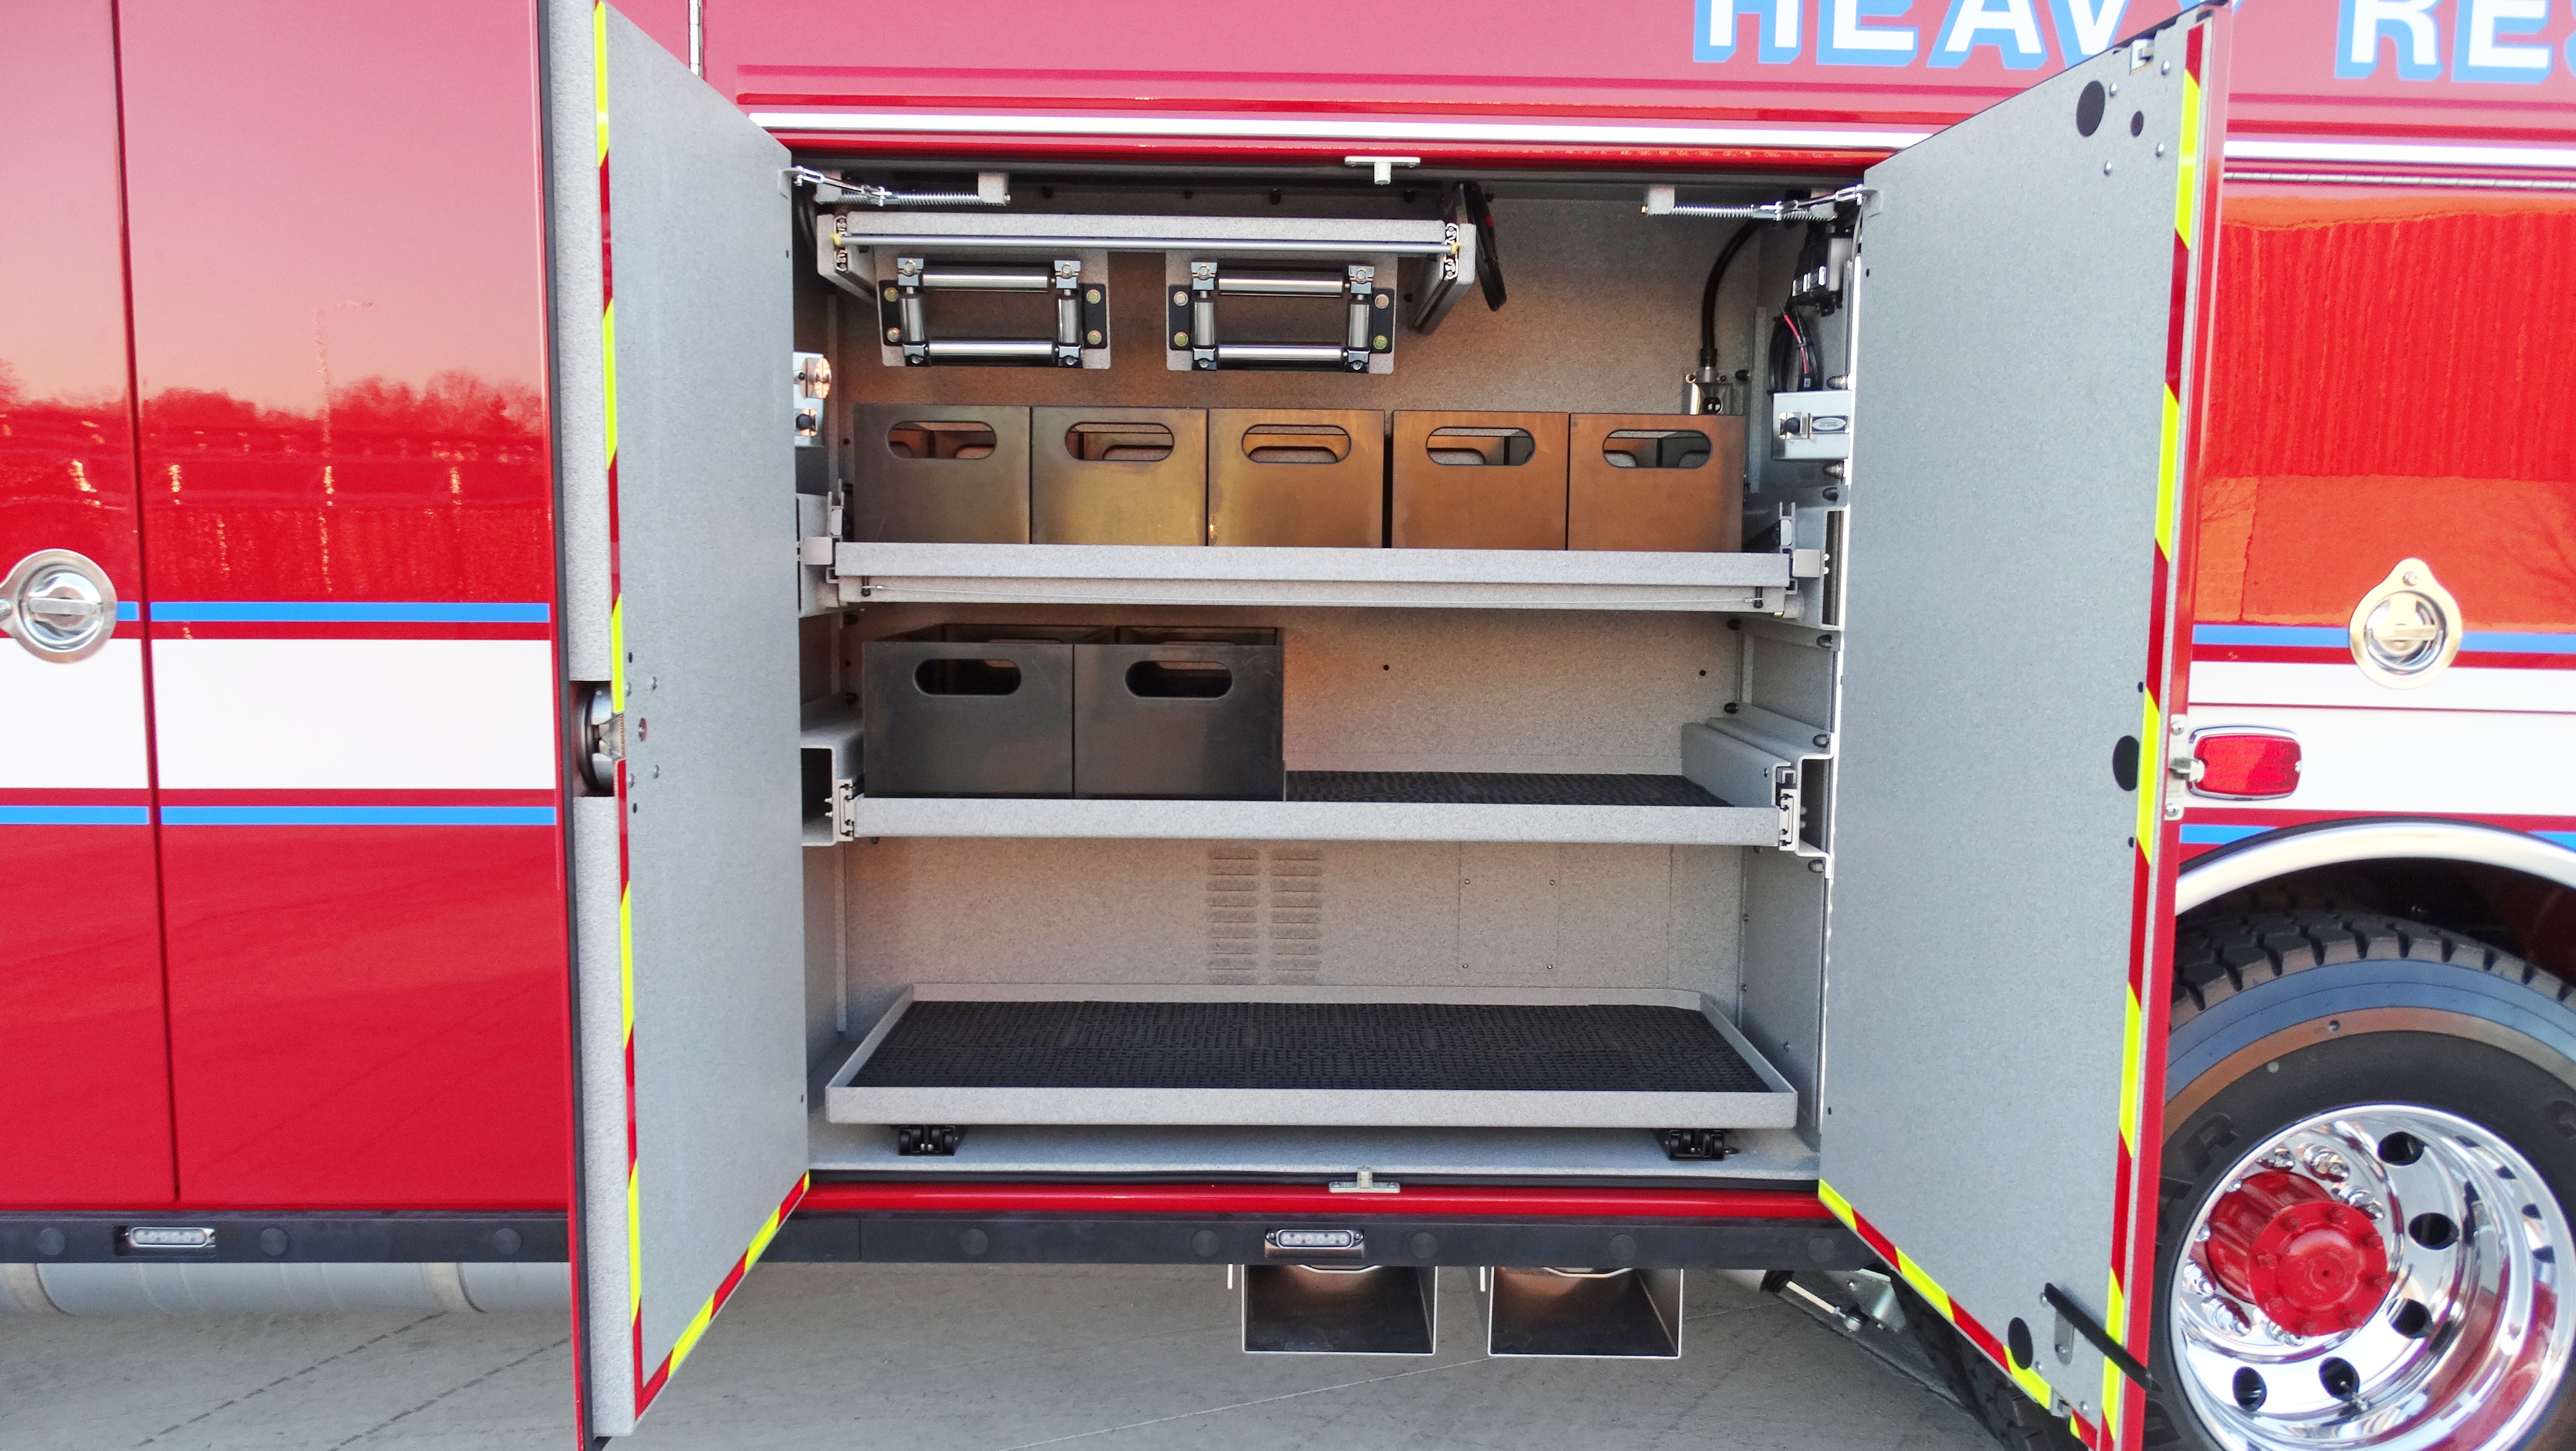 Pierce Combination Rescue Fire Truck parked outside with side compartments open showing storage shelves. 